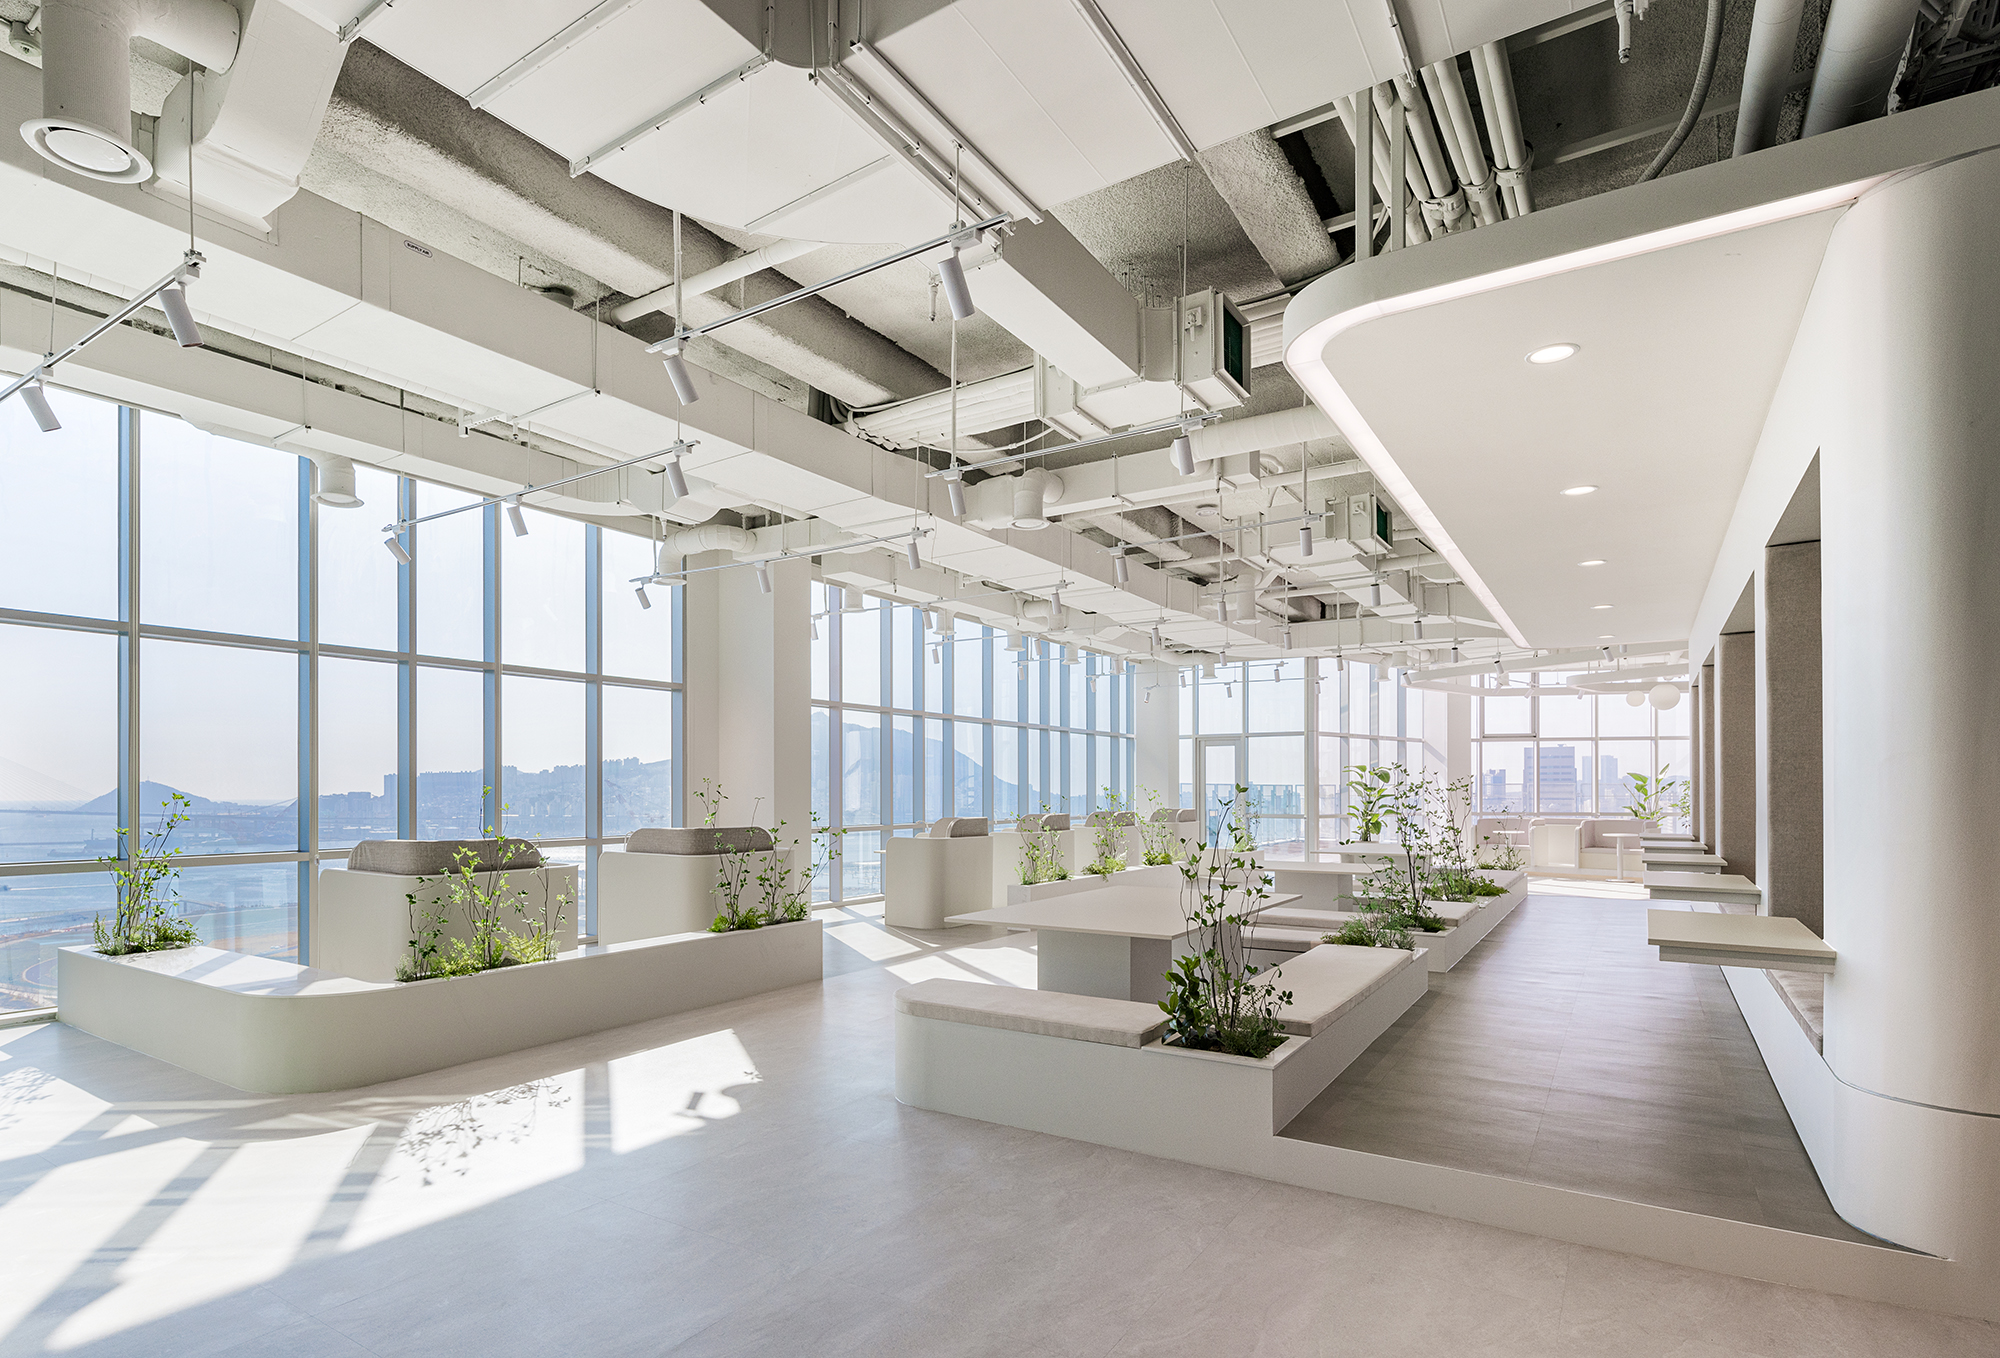 Busan Workation Center - Space for Work & Vacation